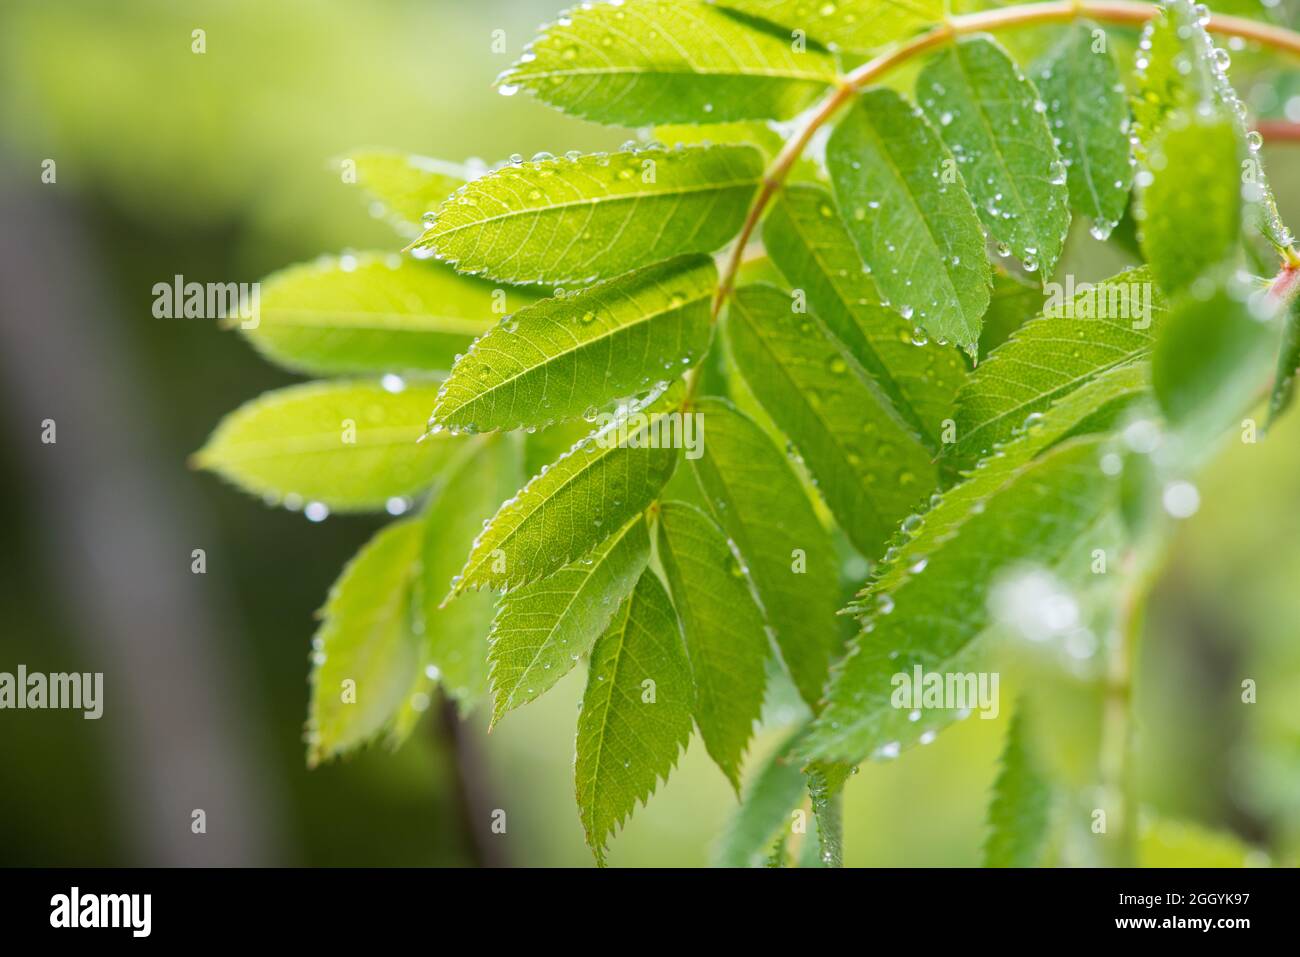 The foliage of a dogberry tree with multiple green leaves hanging from a branch. The sunshine is shedding vibrant rays of light on the leaves. Stock Photo